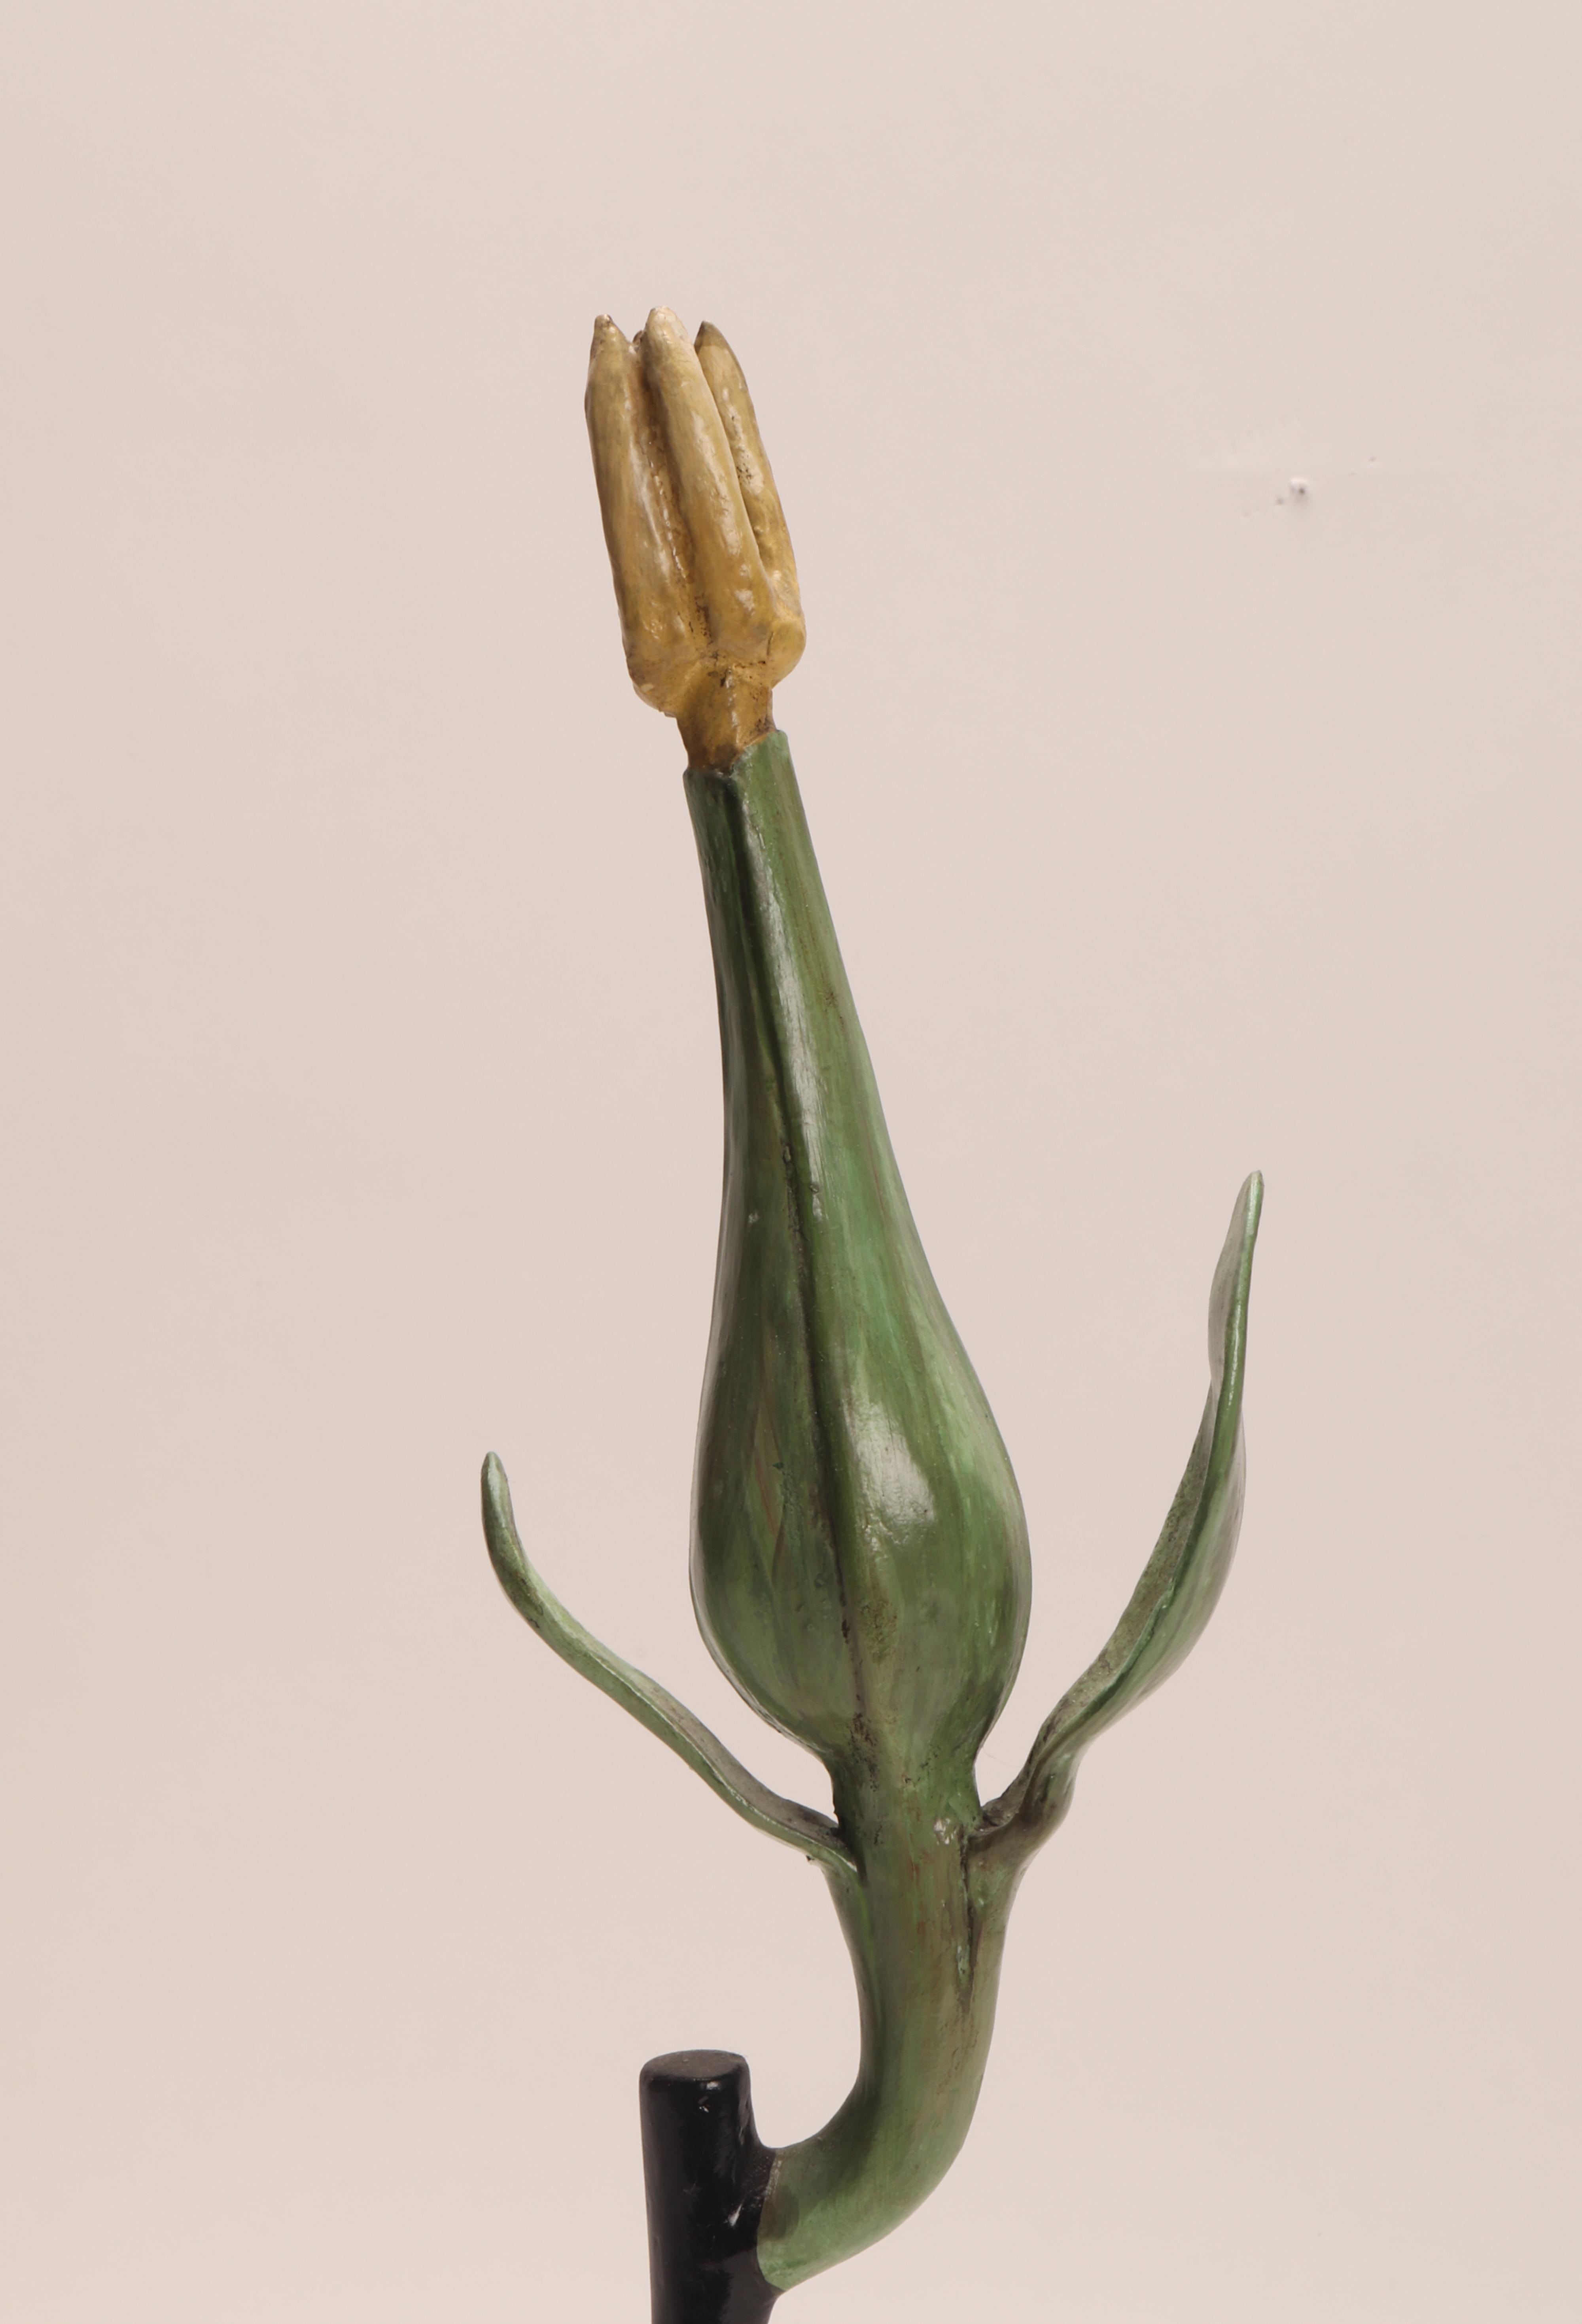 A botanic didactical specimen, depicting a Vitis Vinifera flower, pale yellow green color made out of papier mache, plaster and wood hand painted. Extremely detailed. Paravia Milano, Italy 1900 ca. These botanical models were used in schools to show